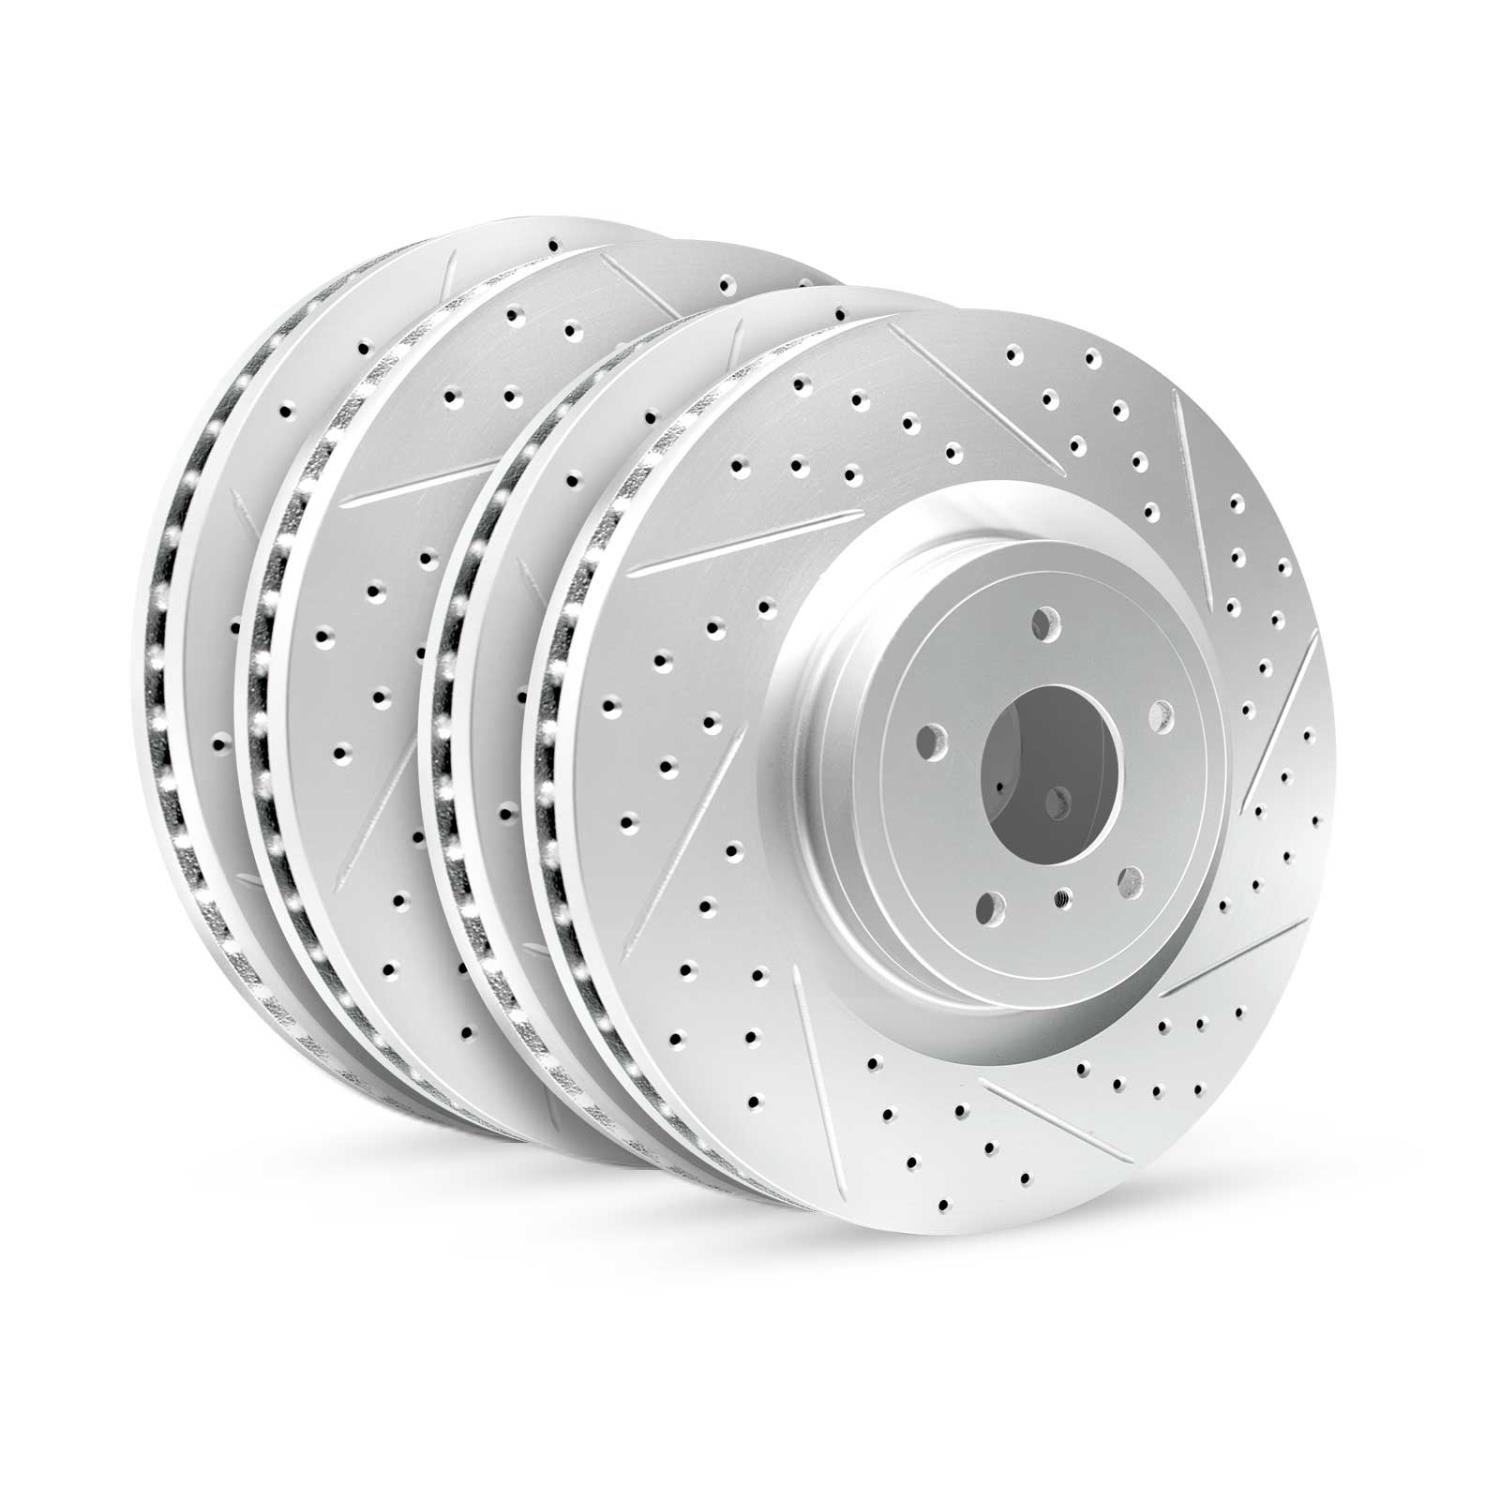 GEO-Carbon Drilled/Slotted Rotors, 1999-2003 Lexus/Toyota/Scion, Position: Front/Rear